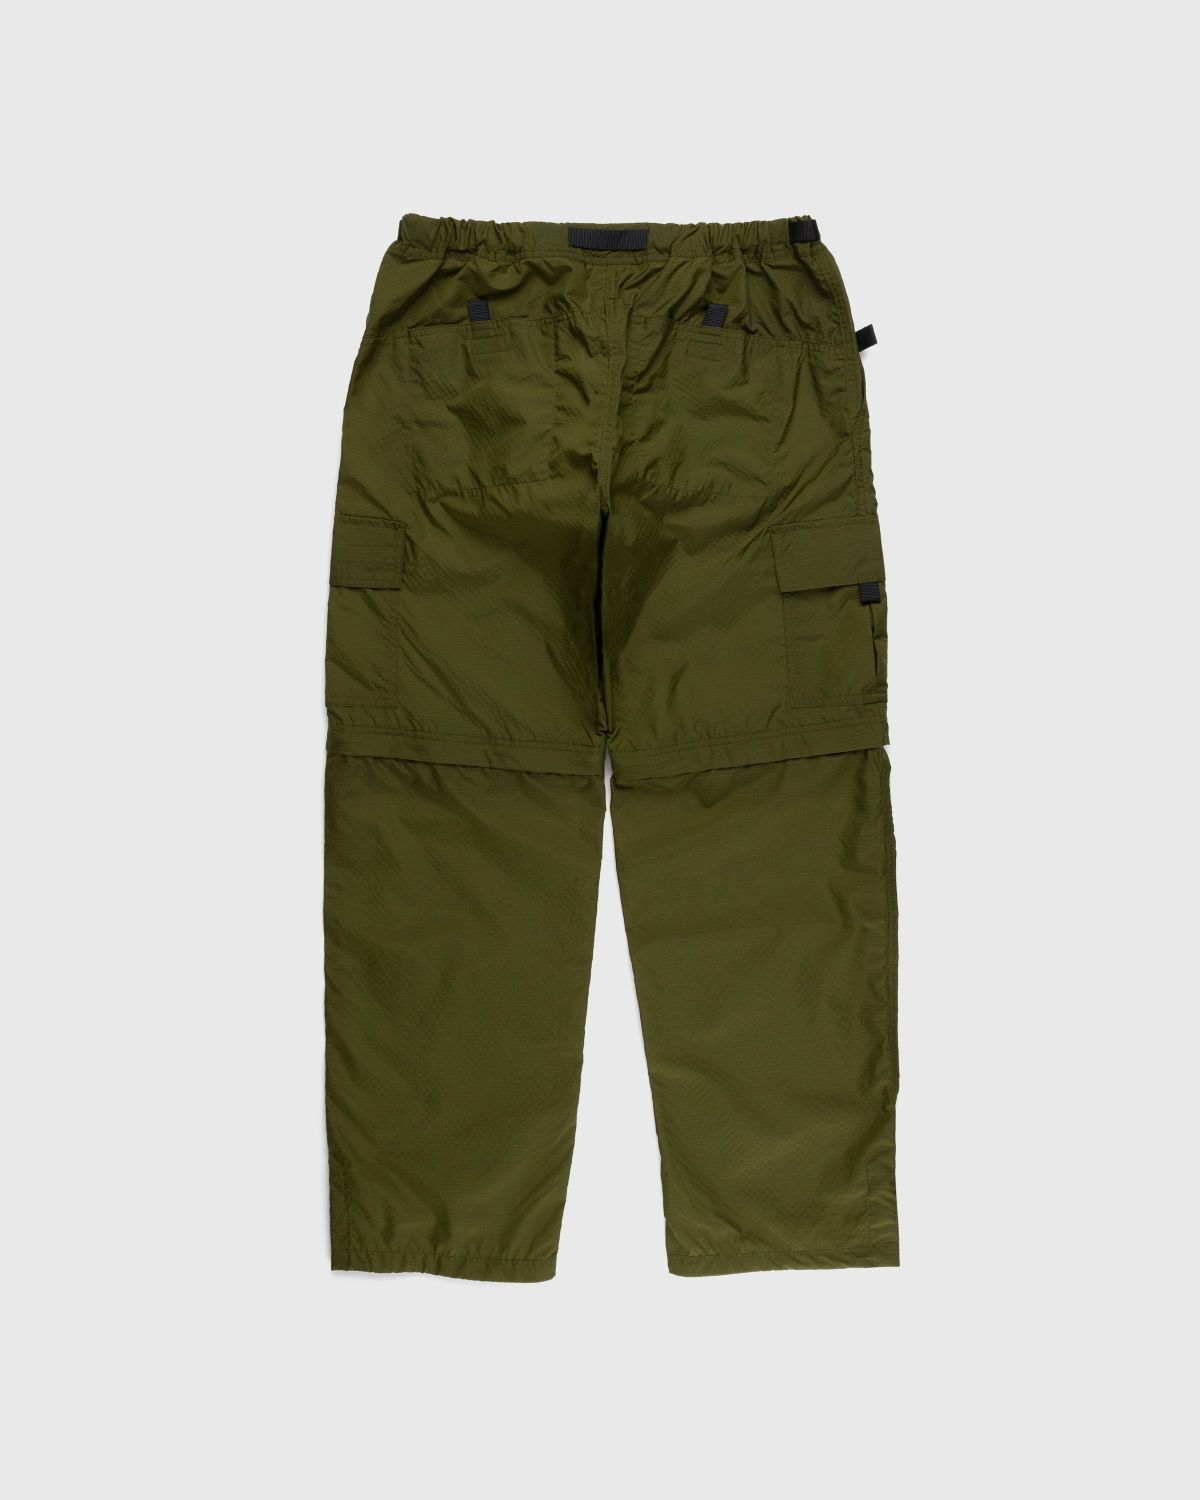 Gramicci – Utility Zip-Off Cargo Pant Army Green - Cargo Pants - Green - Image 1